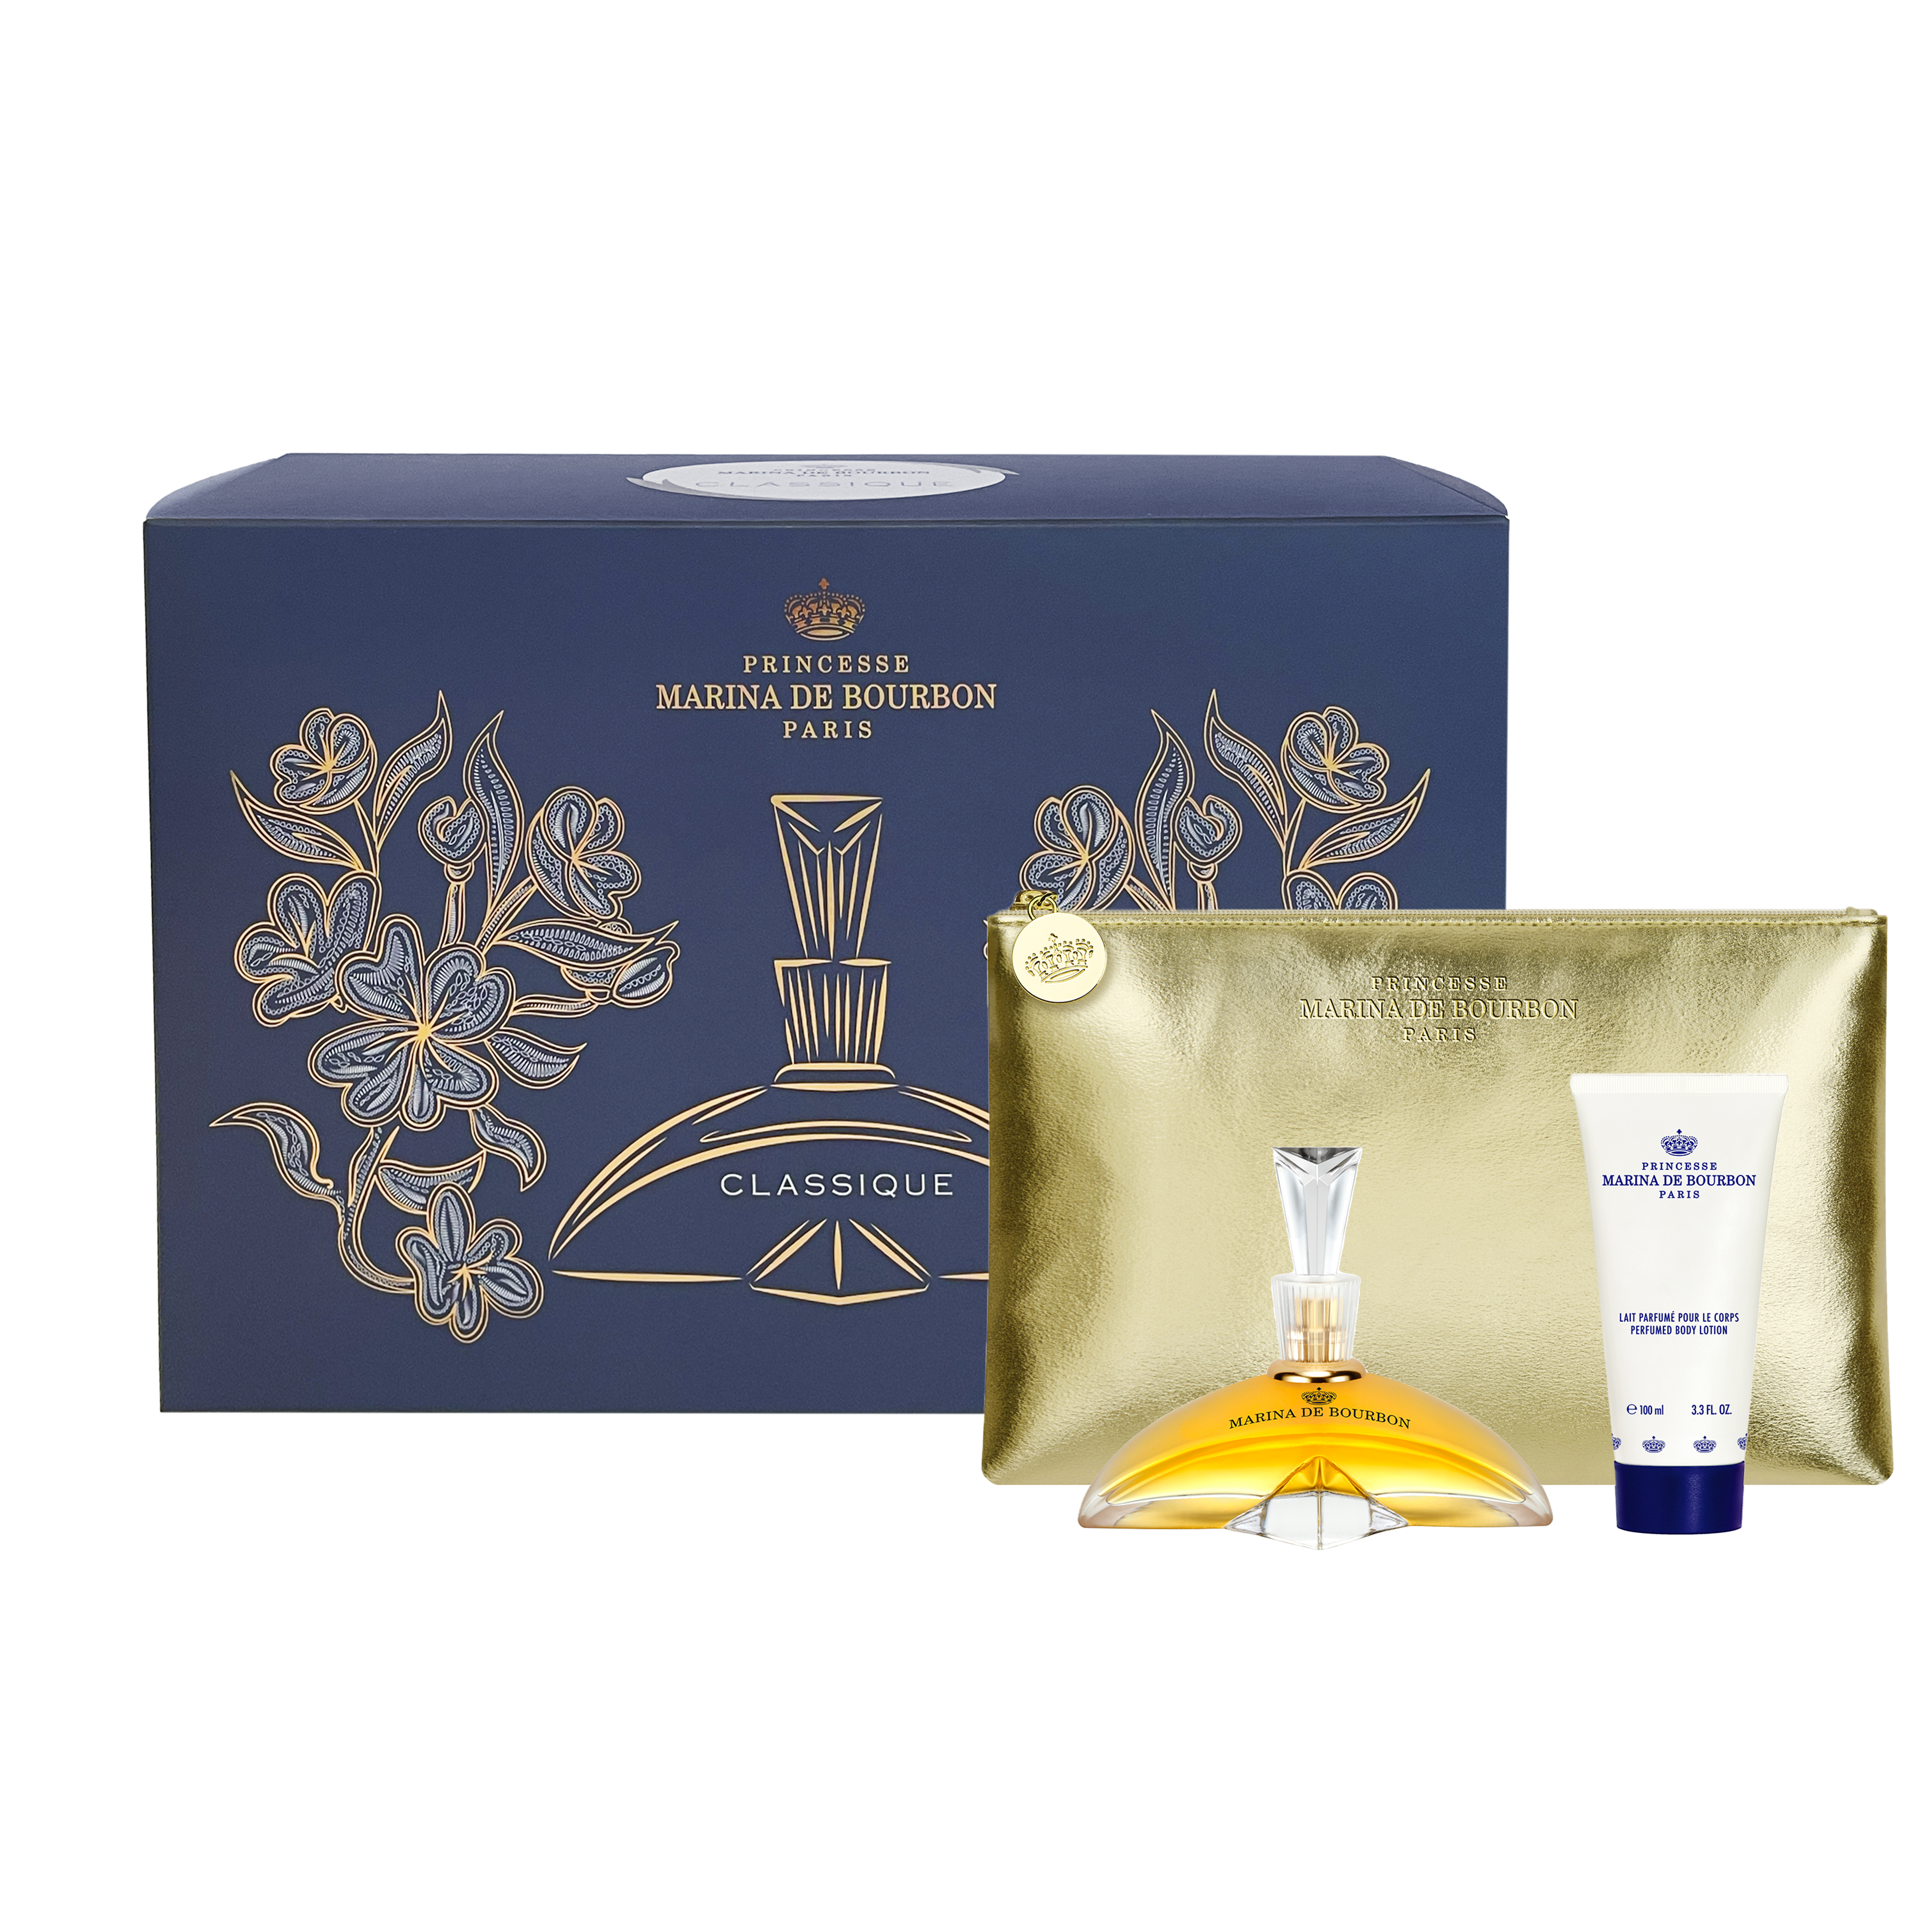 CRISTAL ROYAL 50ml Gift Set - A pouch and the perfumed body lotion offered